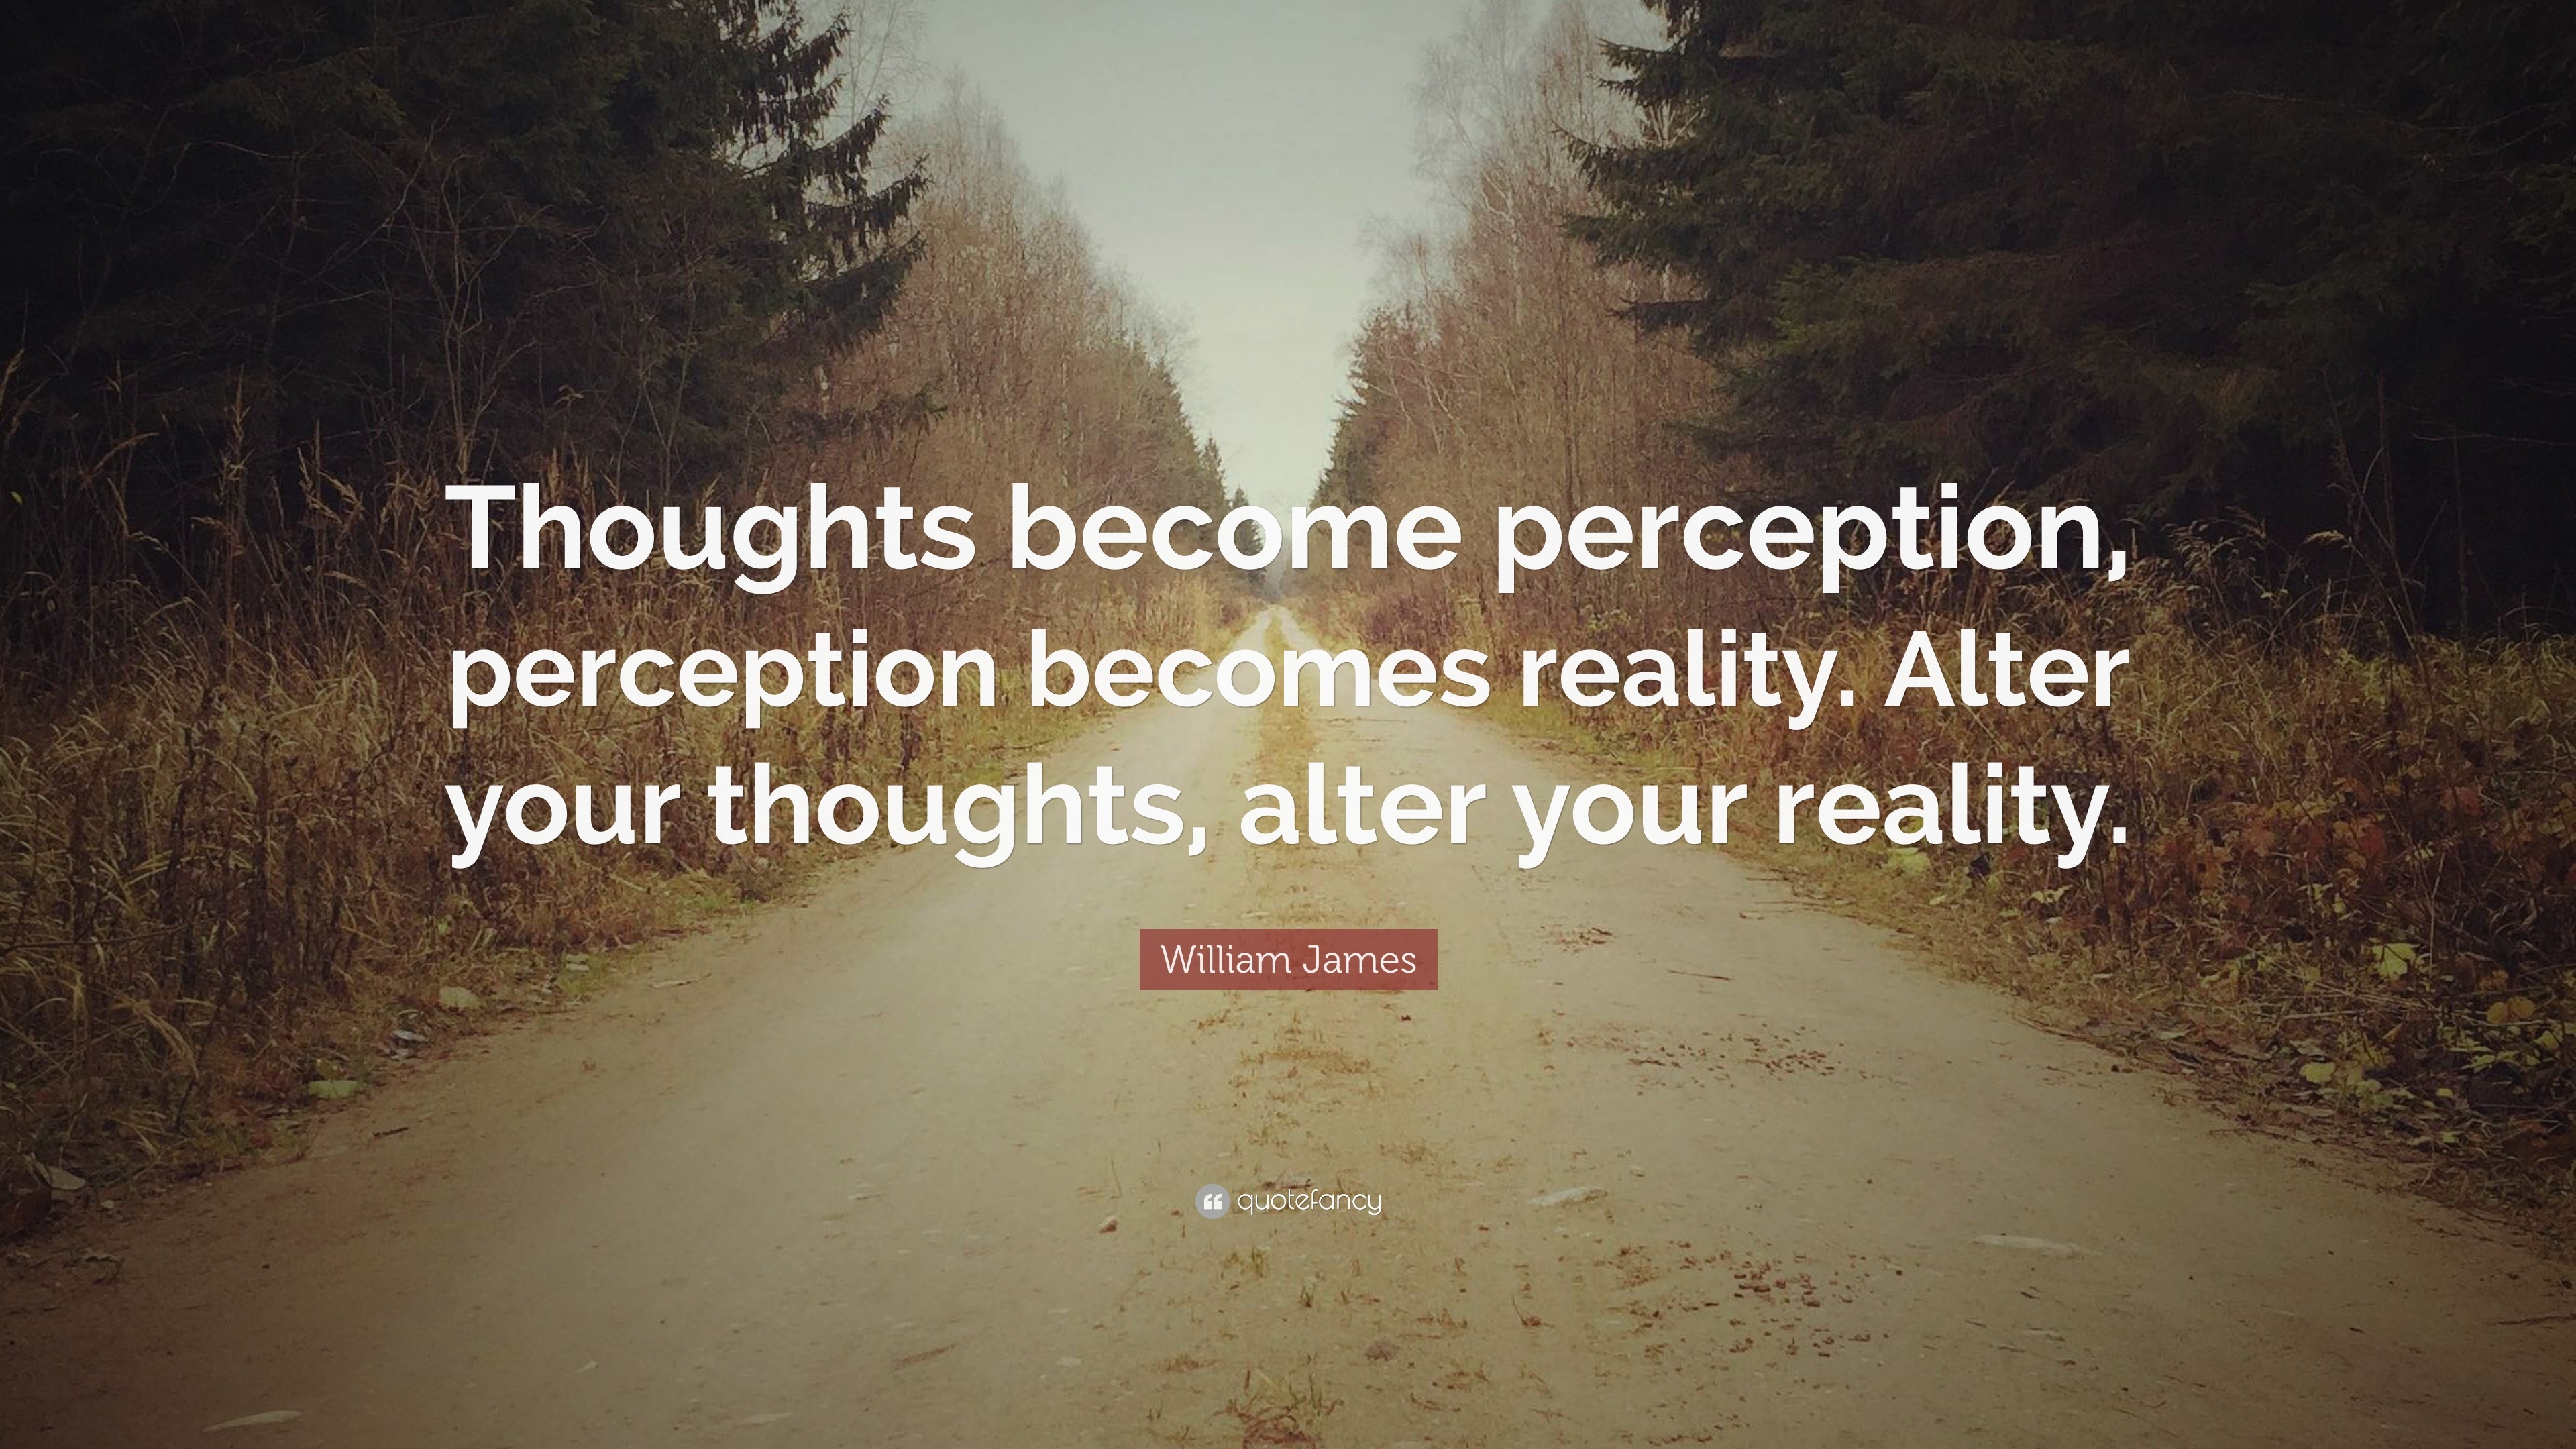 William James Quote: “Thoughts become perception, perception becomes